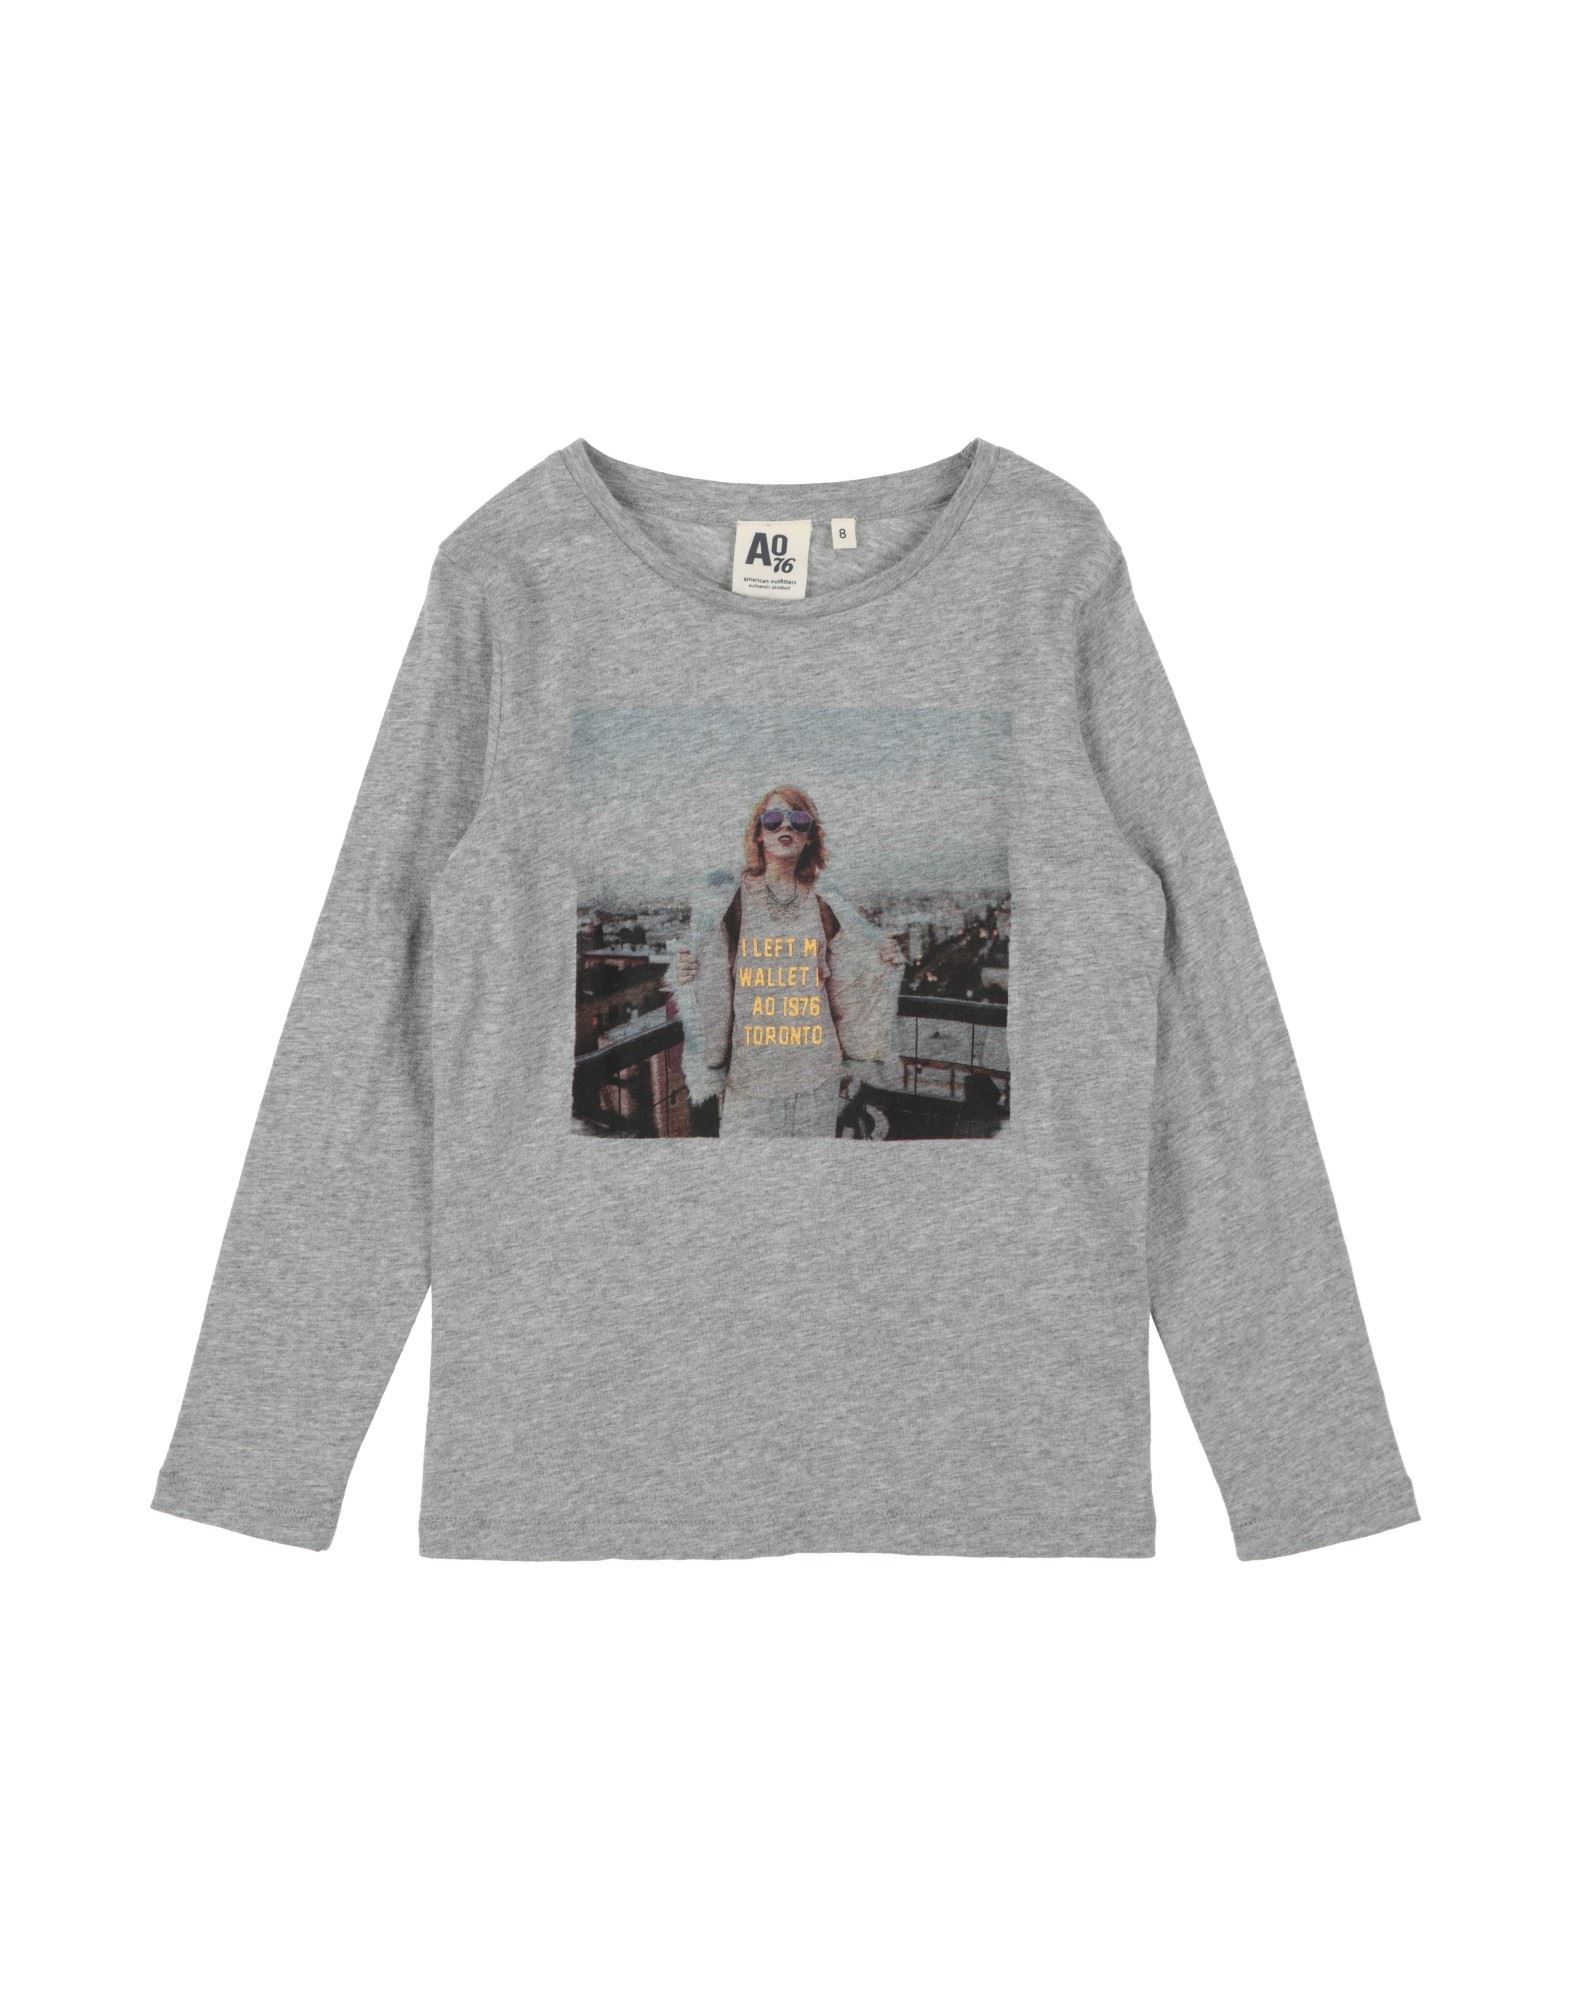 American Outfitters Kids' T-shirts In Light Grey